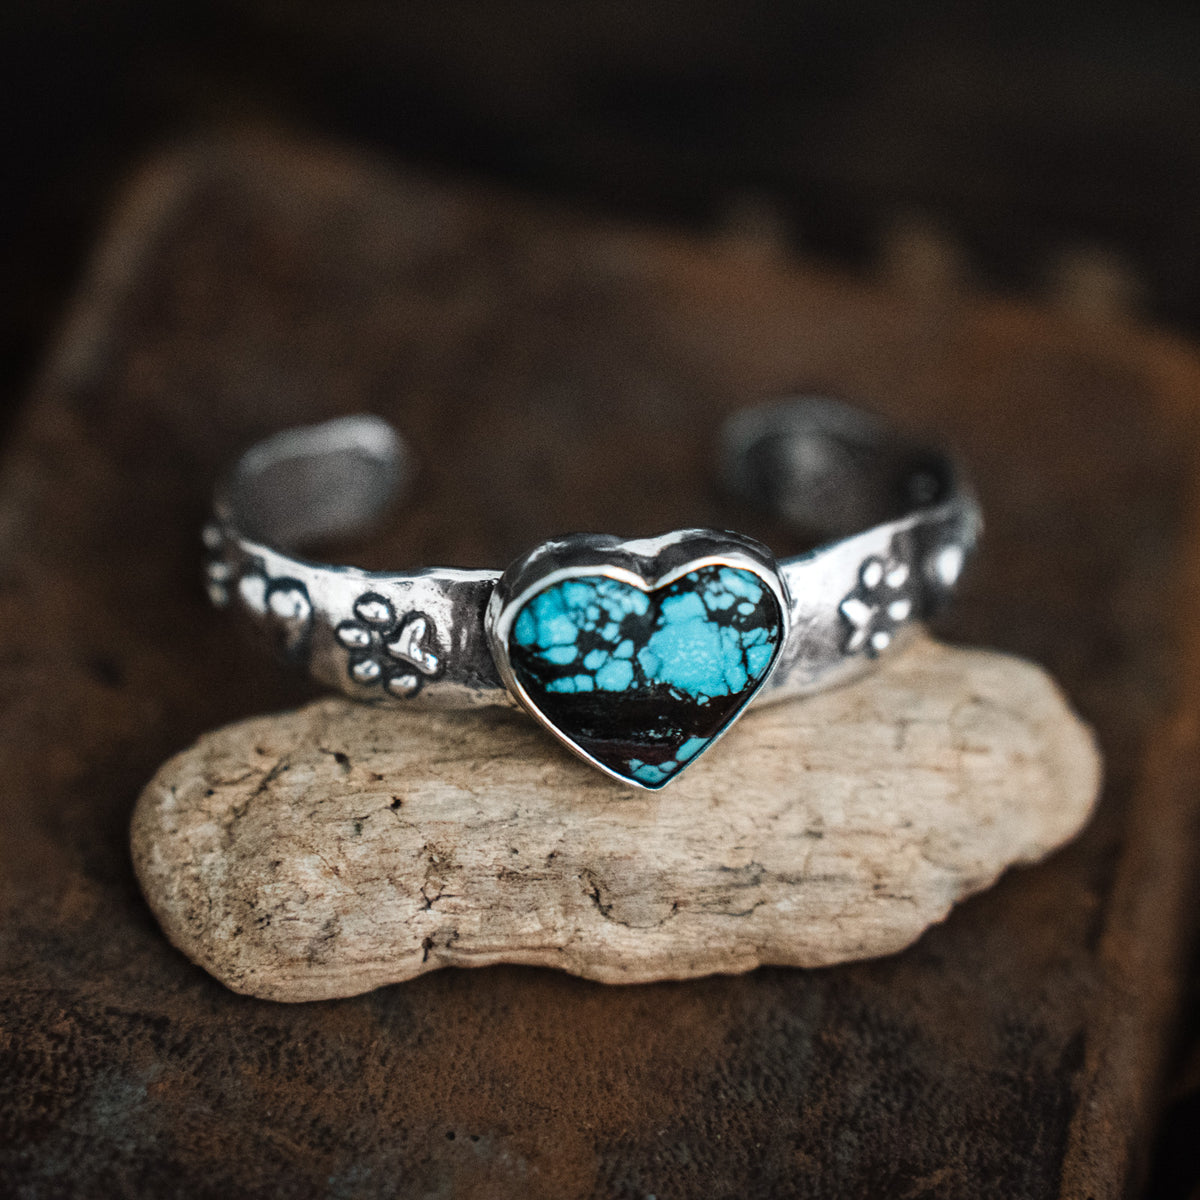 My Dog is Forever in my Heart Turquoise Cuff